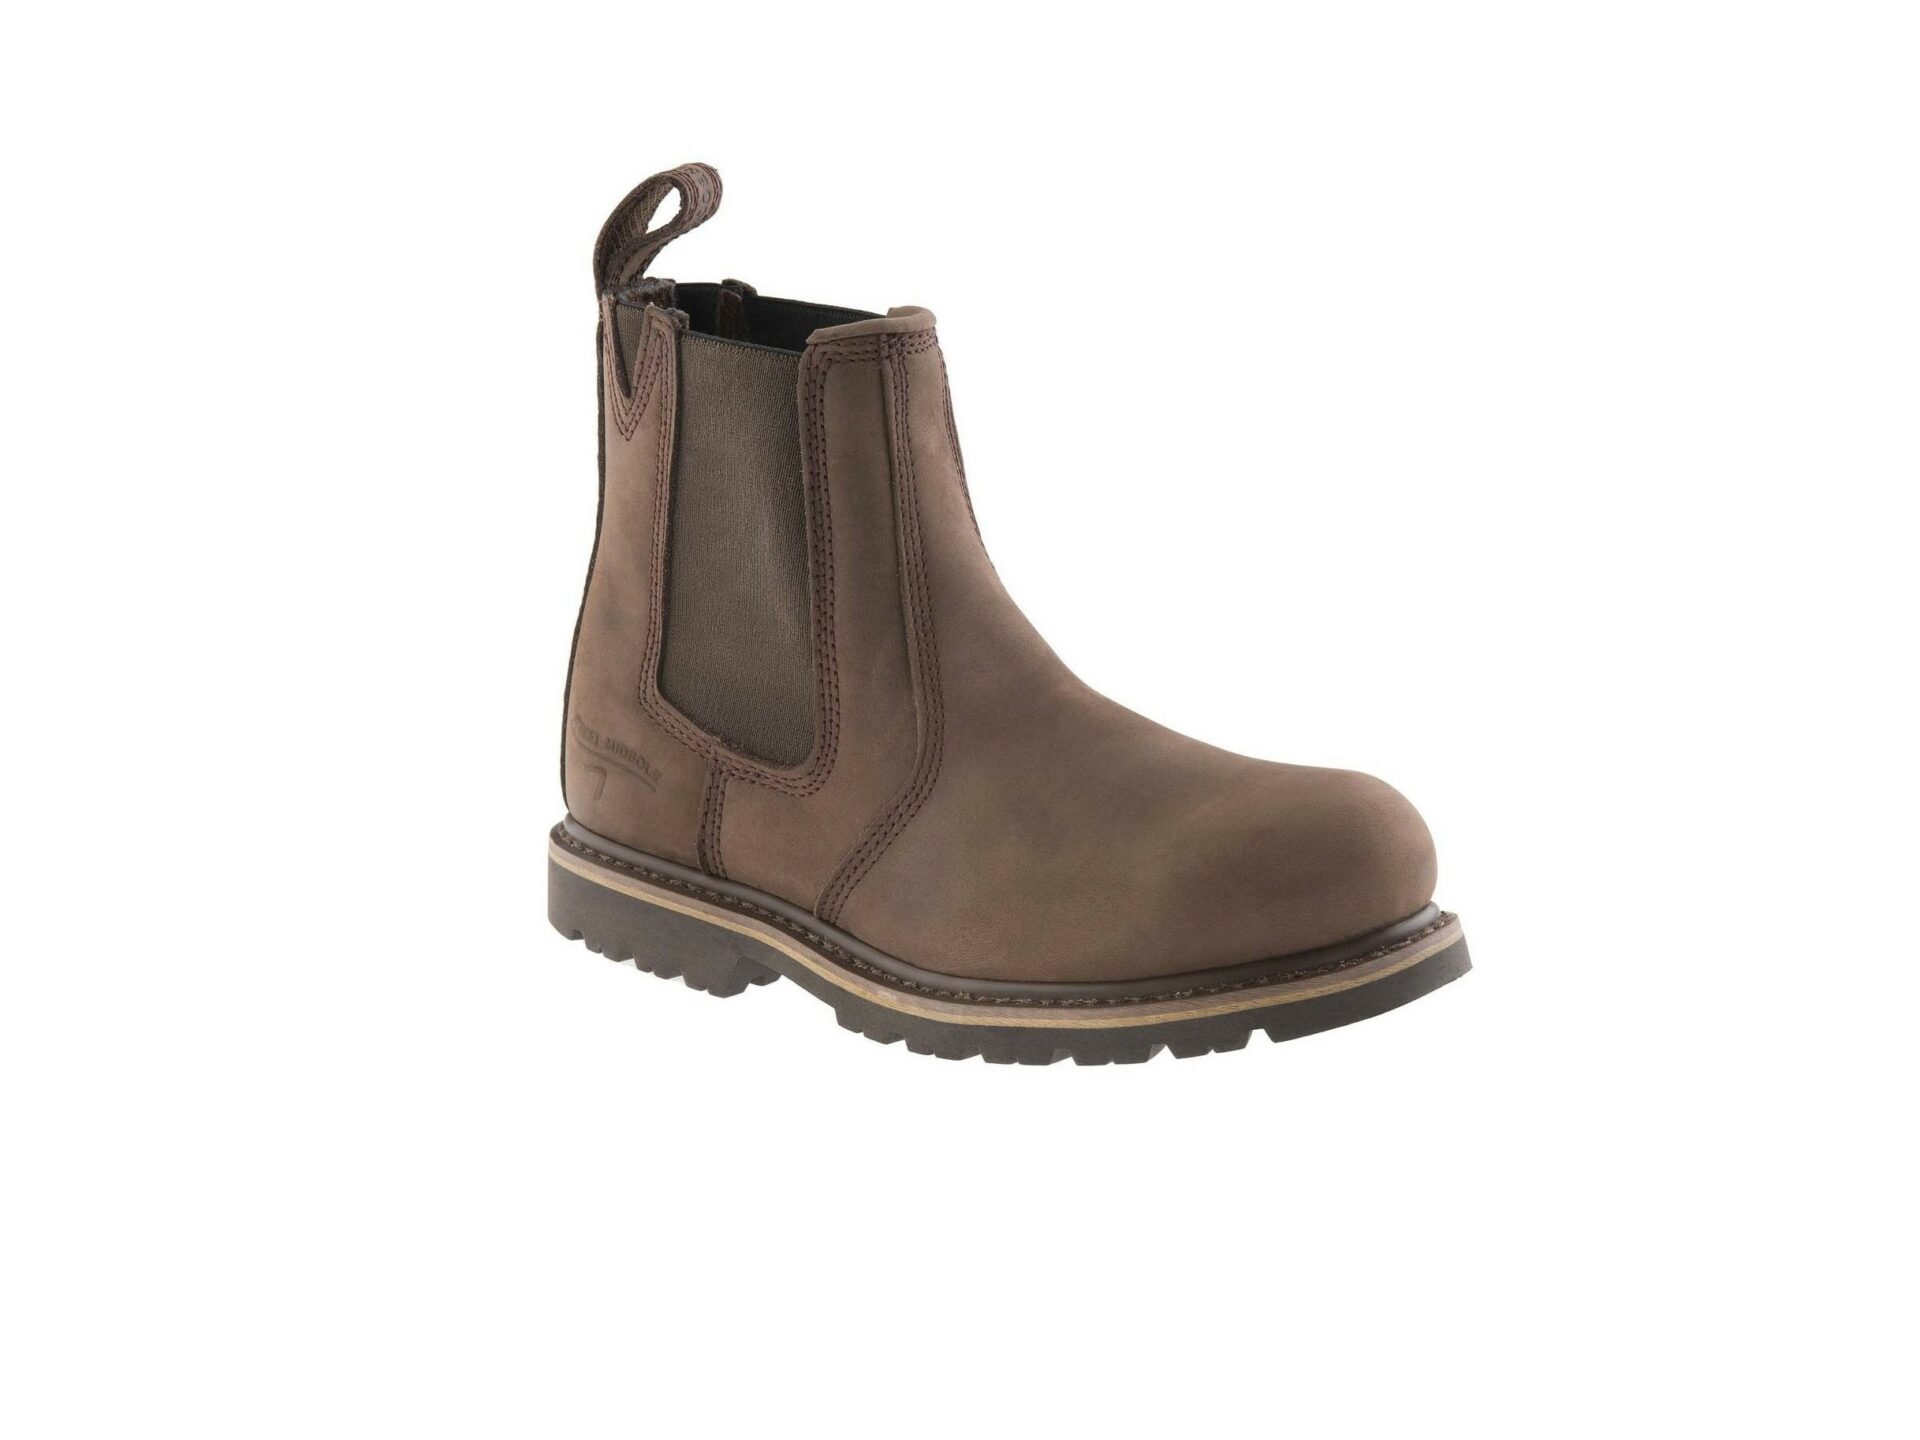 BUCKLER BOOTS NON SAFETY DEALER BOOT CHOCOLATE | Irelands Group